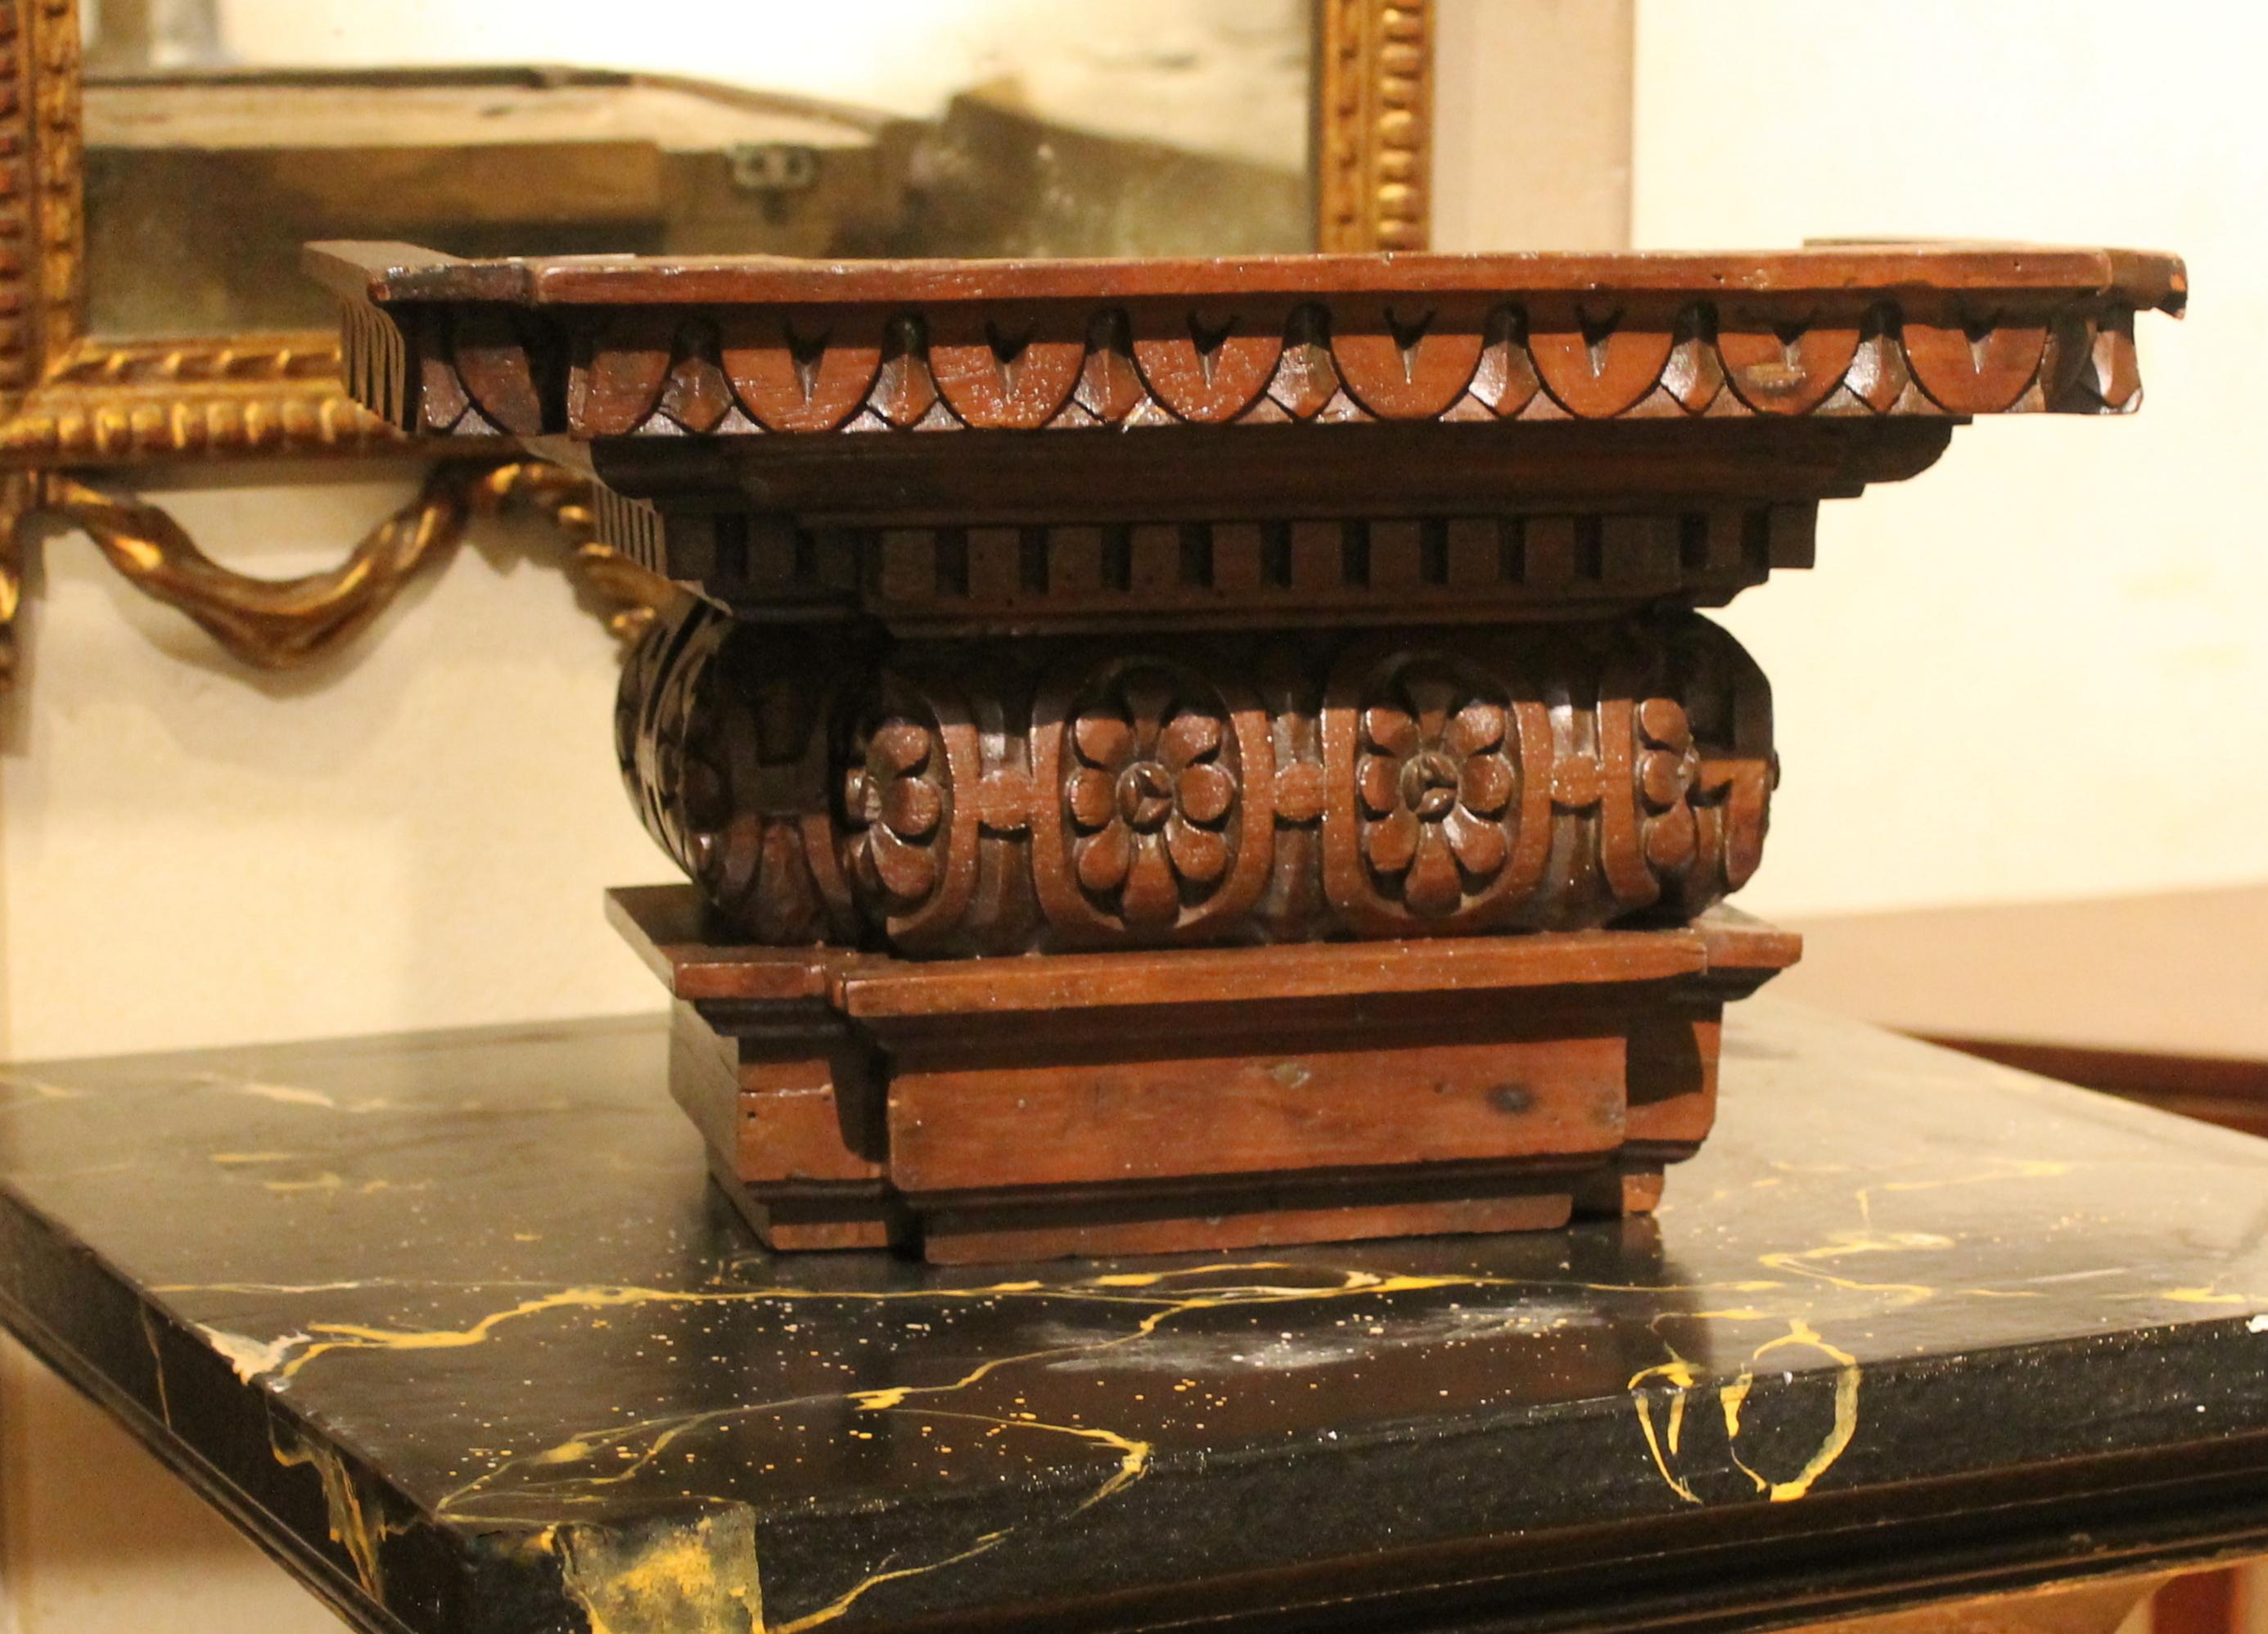 This wonderful antique 19th century Tuscan solid walnut wood wall-mounted shelf is deeply hand carved. An entirely handcrafted neoclassical style wall bracket of narrow proportion with the most wonderful architectural shape and patina.
This charming